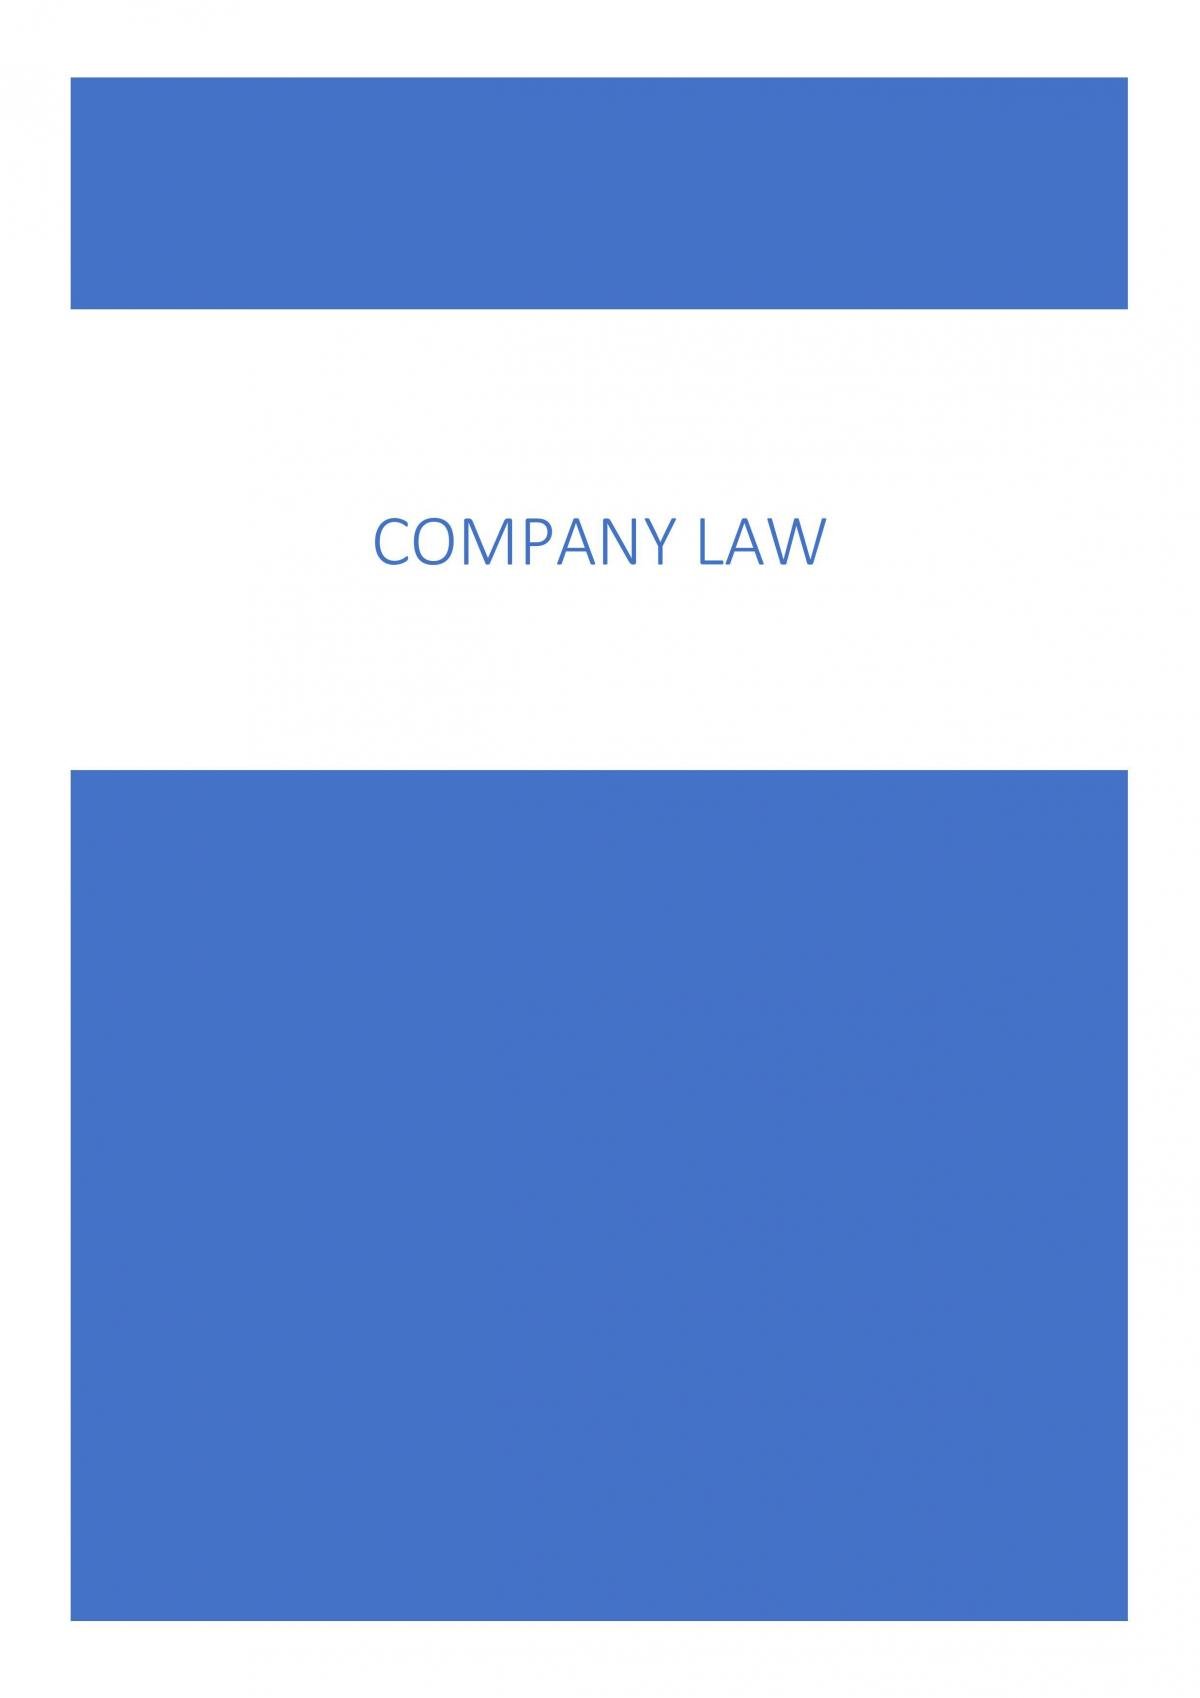 Company Law complete notes - Page 1